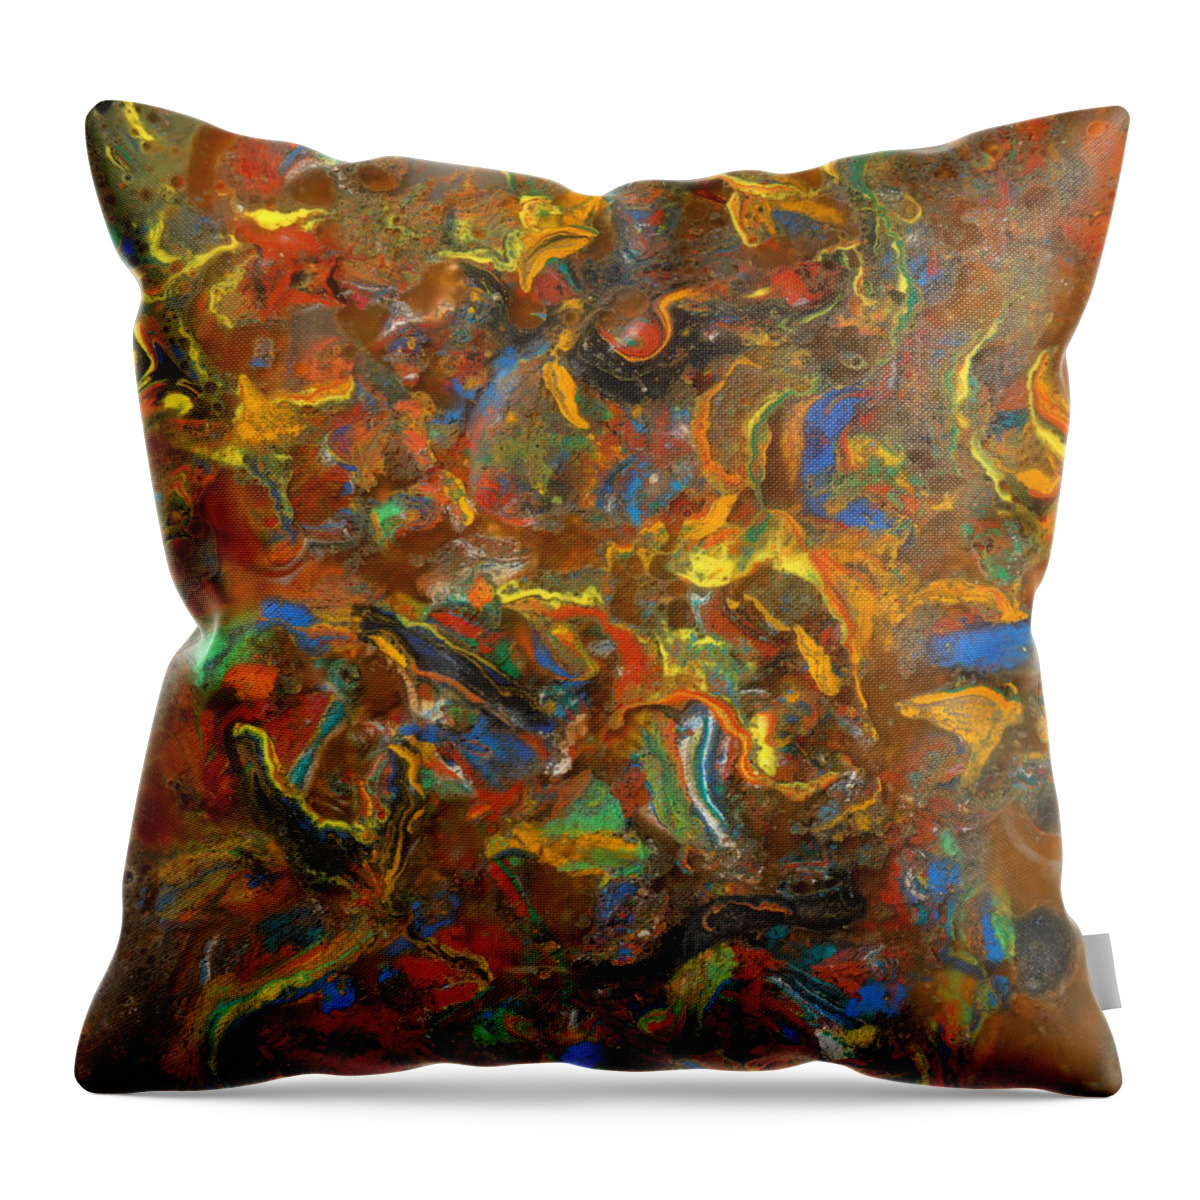 Fall Stream Throw Pillow featuring the mixed media Fall Stream - Icy Abstract 34 by Sami Tiainen